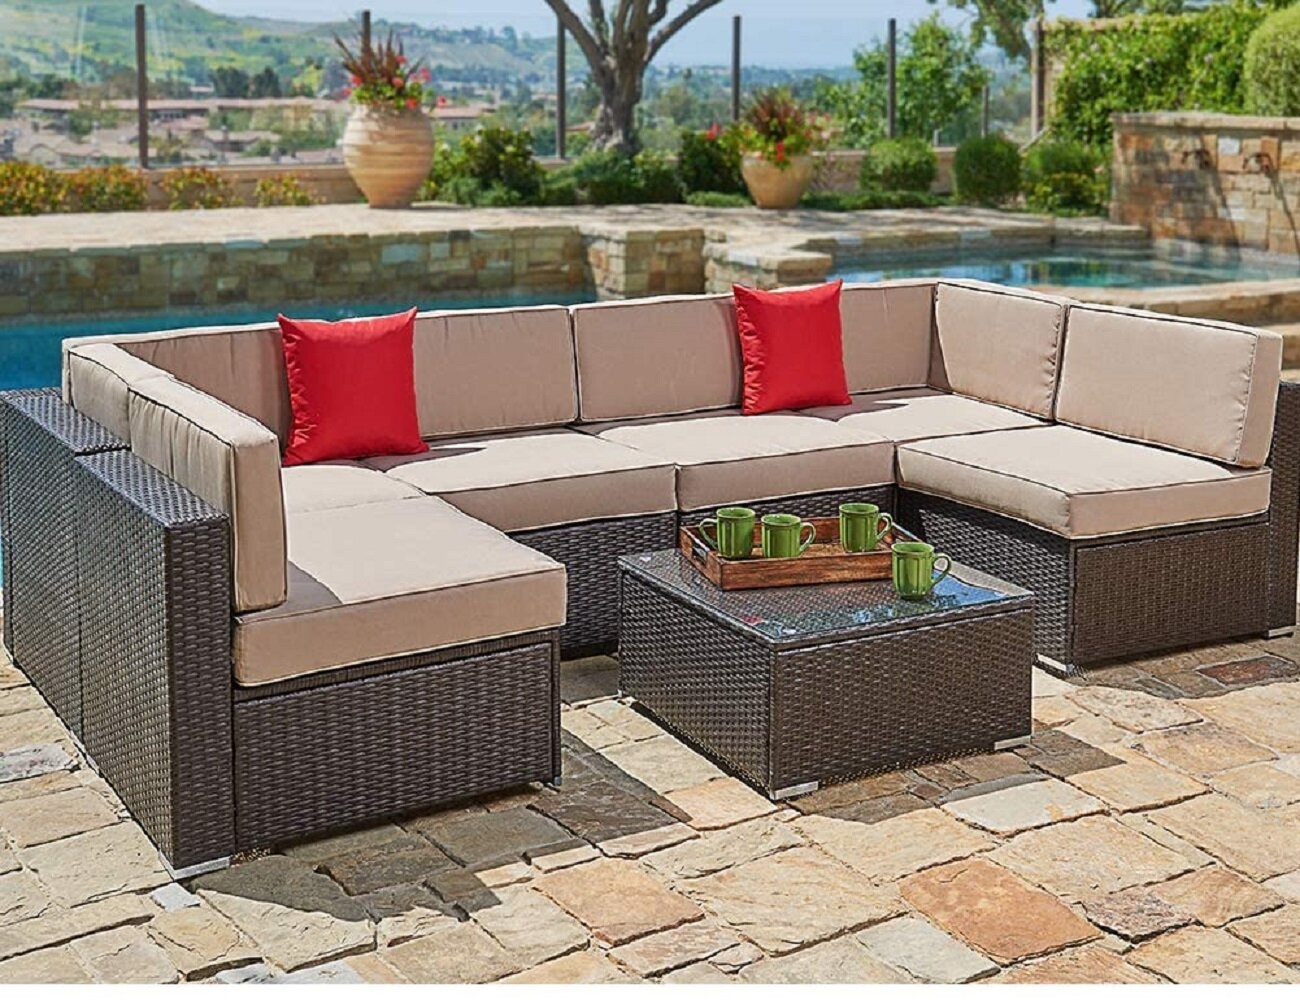 Patio Furniture For Heavy Weight, Best Patio Furniture For Large Person